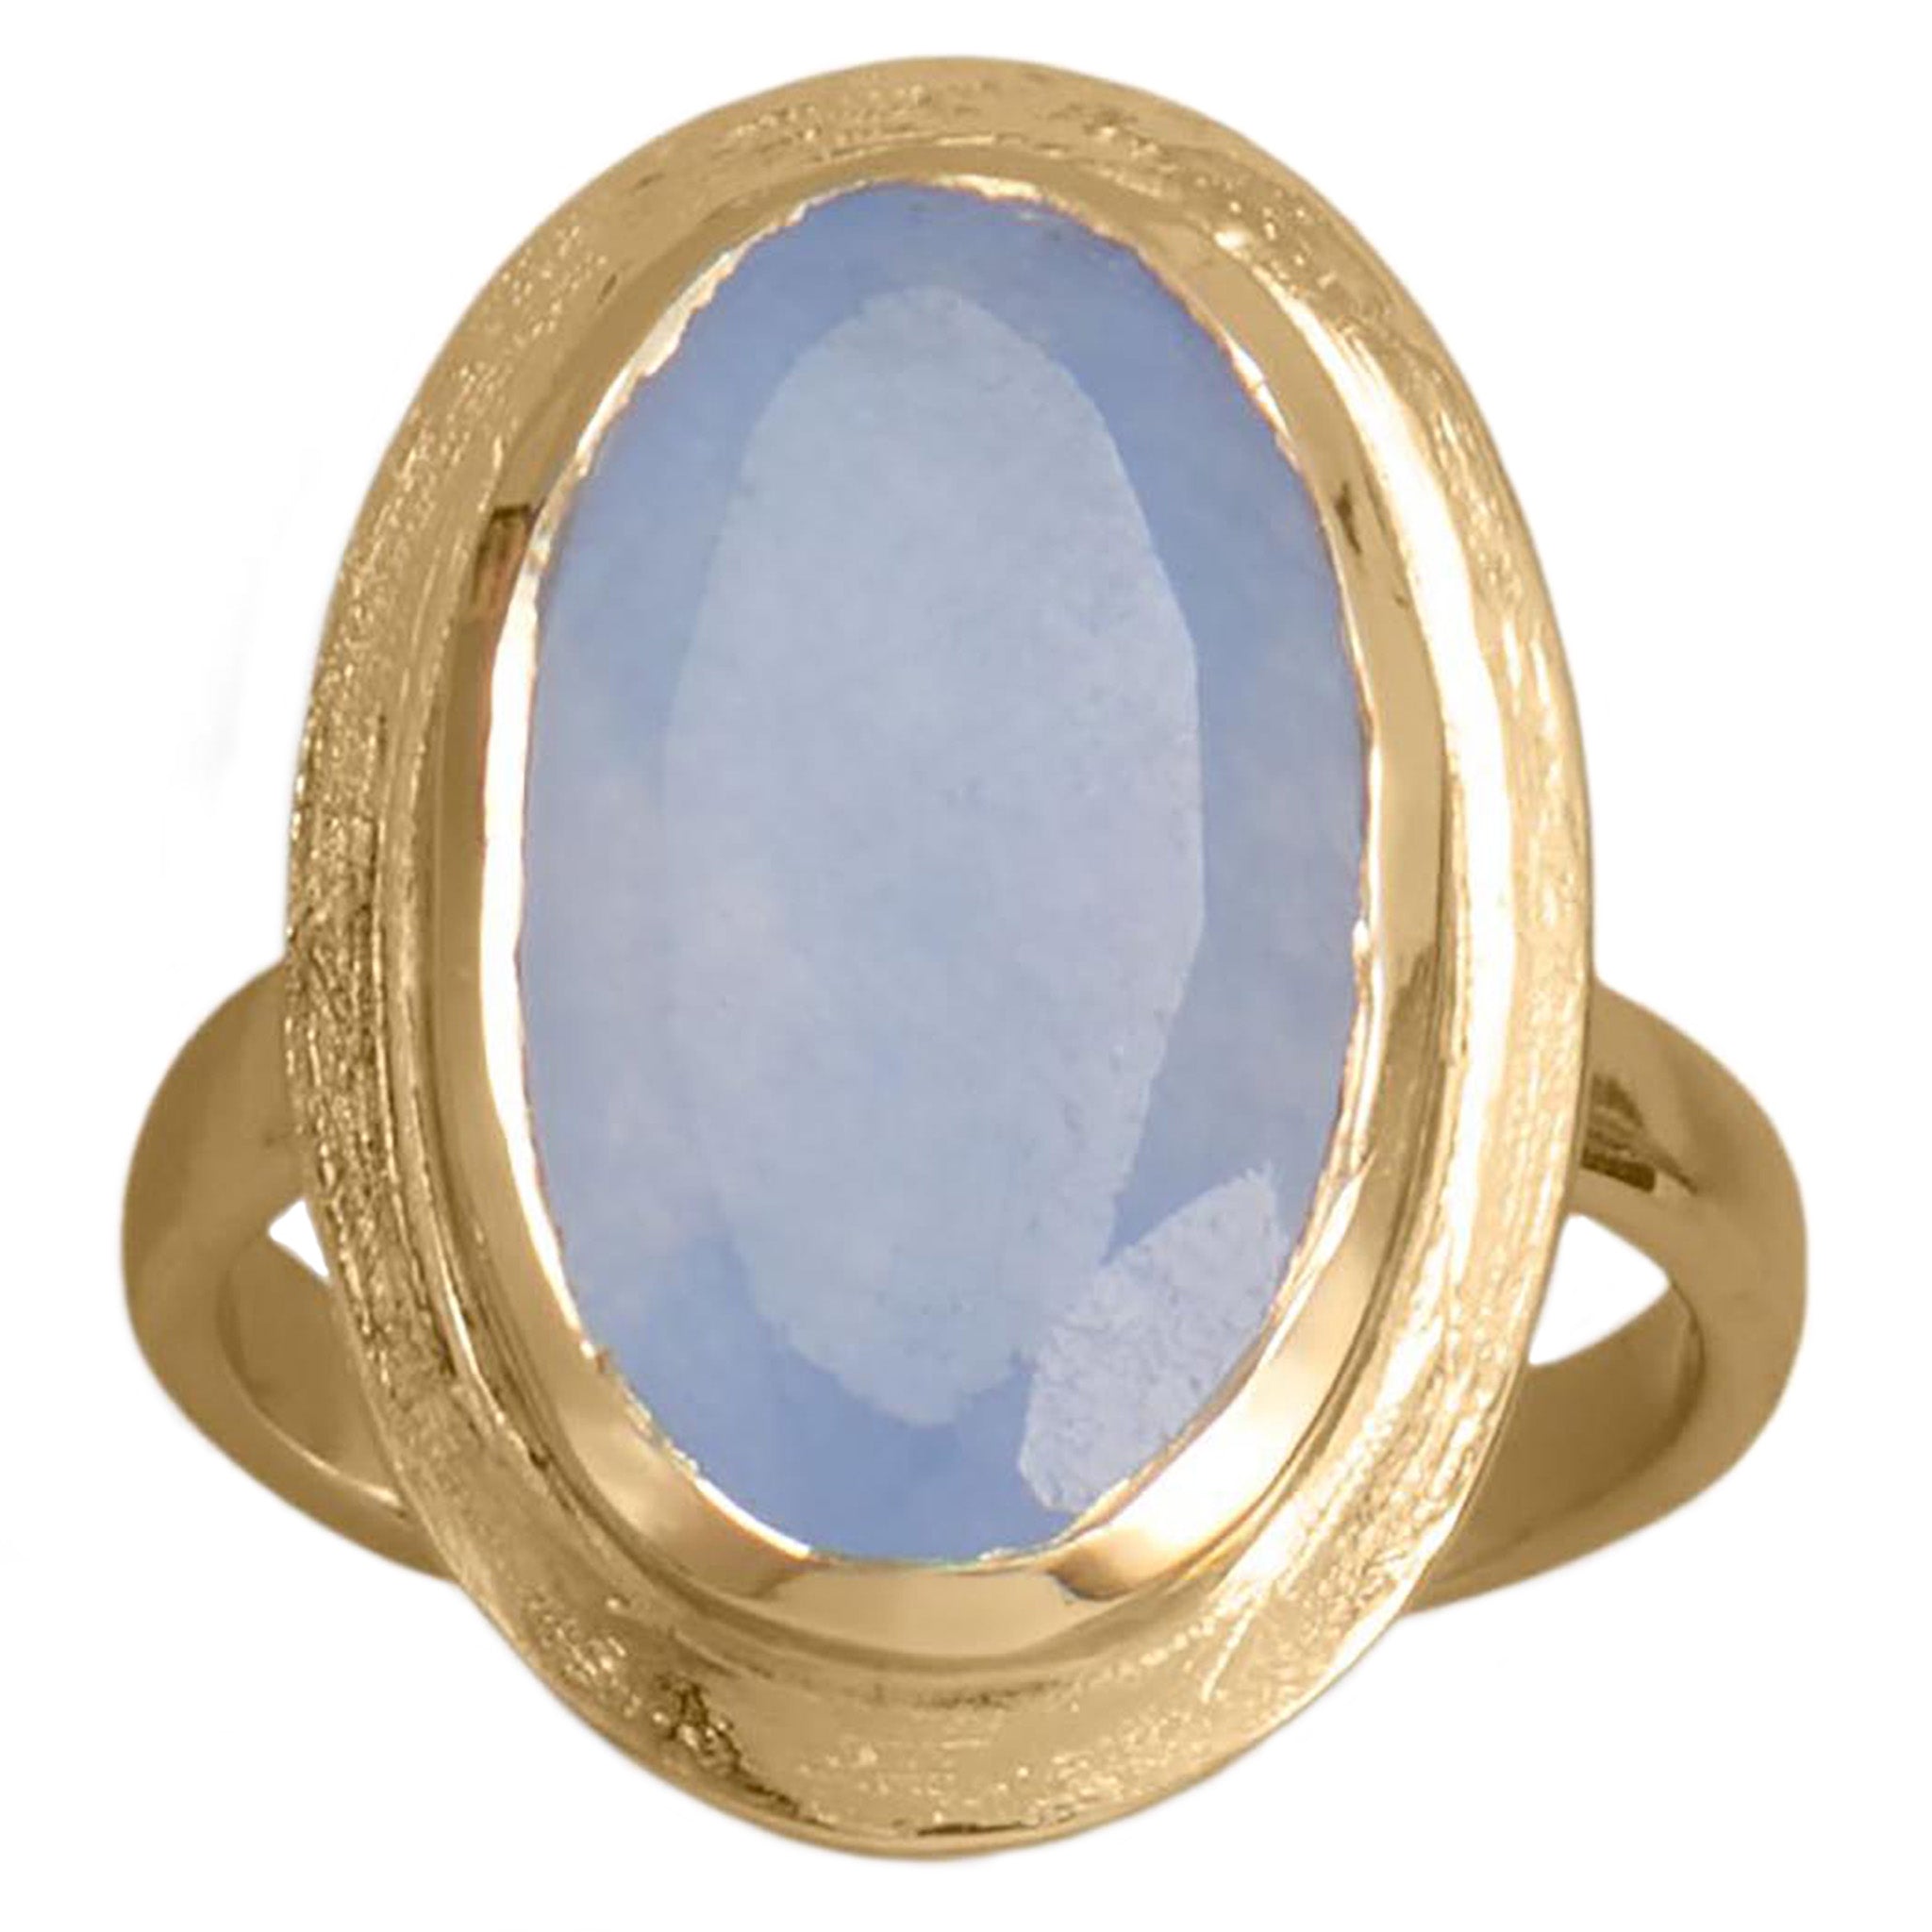 Periwinkle Chalcedony Statement Ring